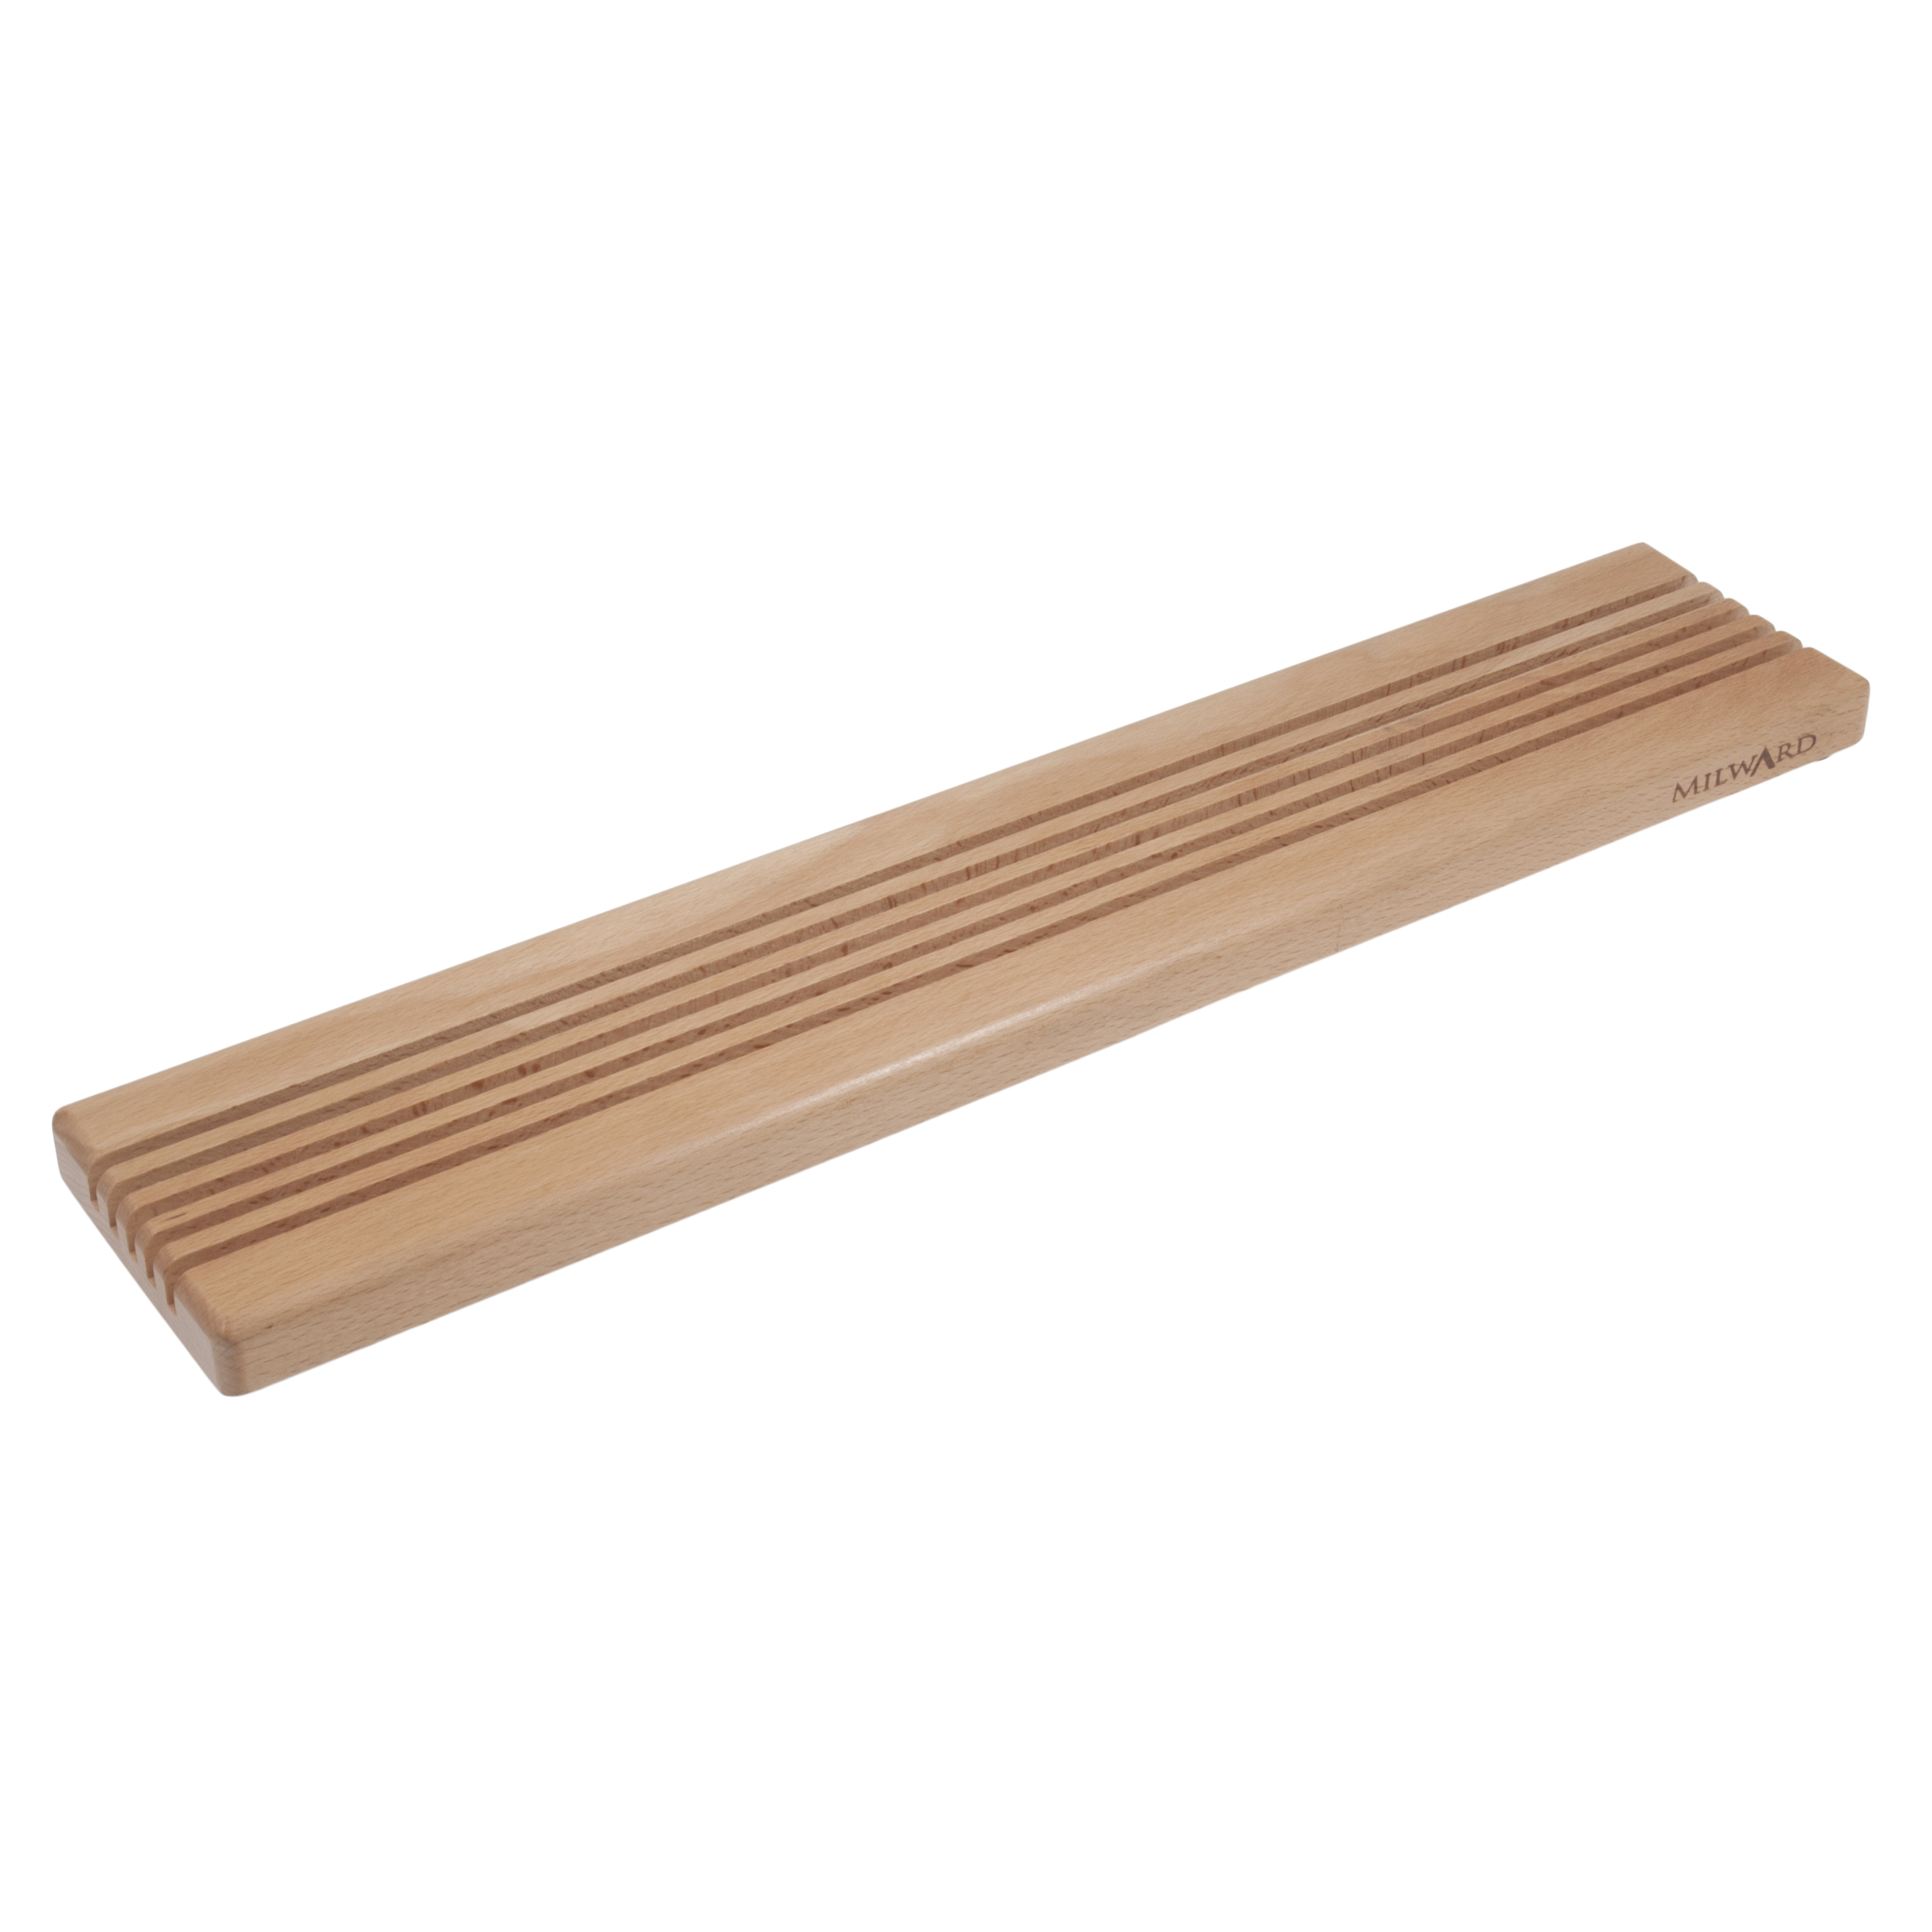 Picture of Ruler Rack: Large - 5 Slots: Beech Wood